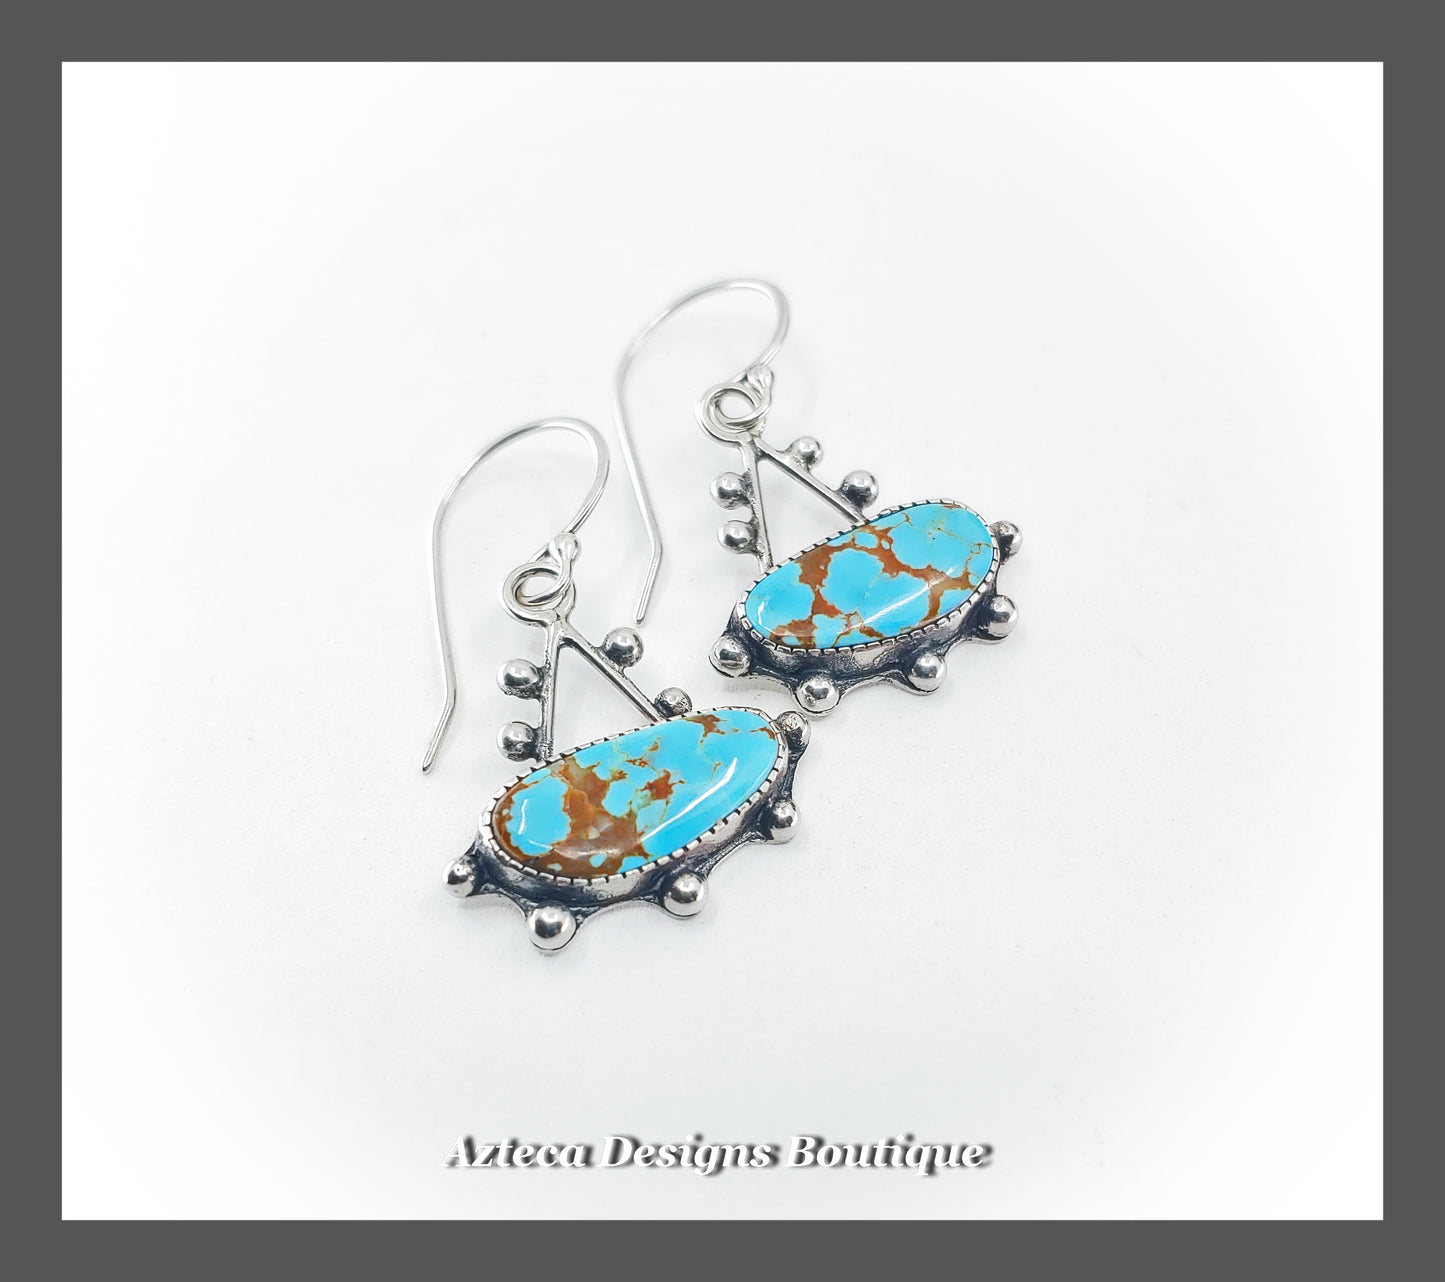 Number 8 Turquoise + Argentium Silver Hand Fabricated Granulation Drop Earrings